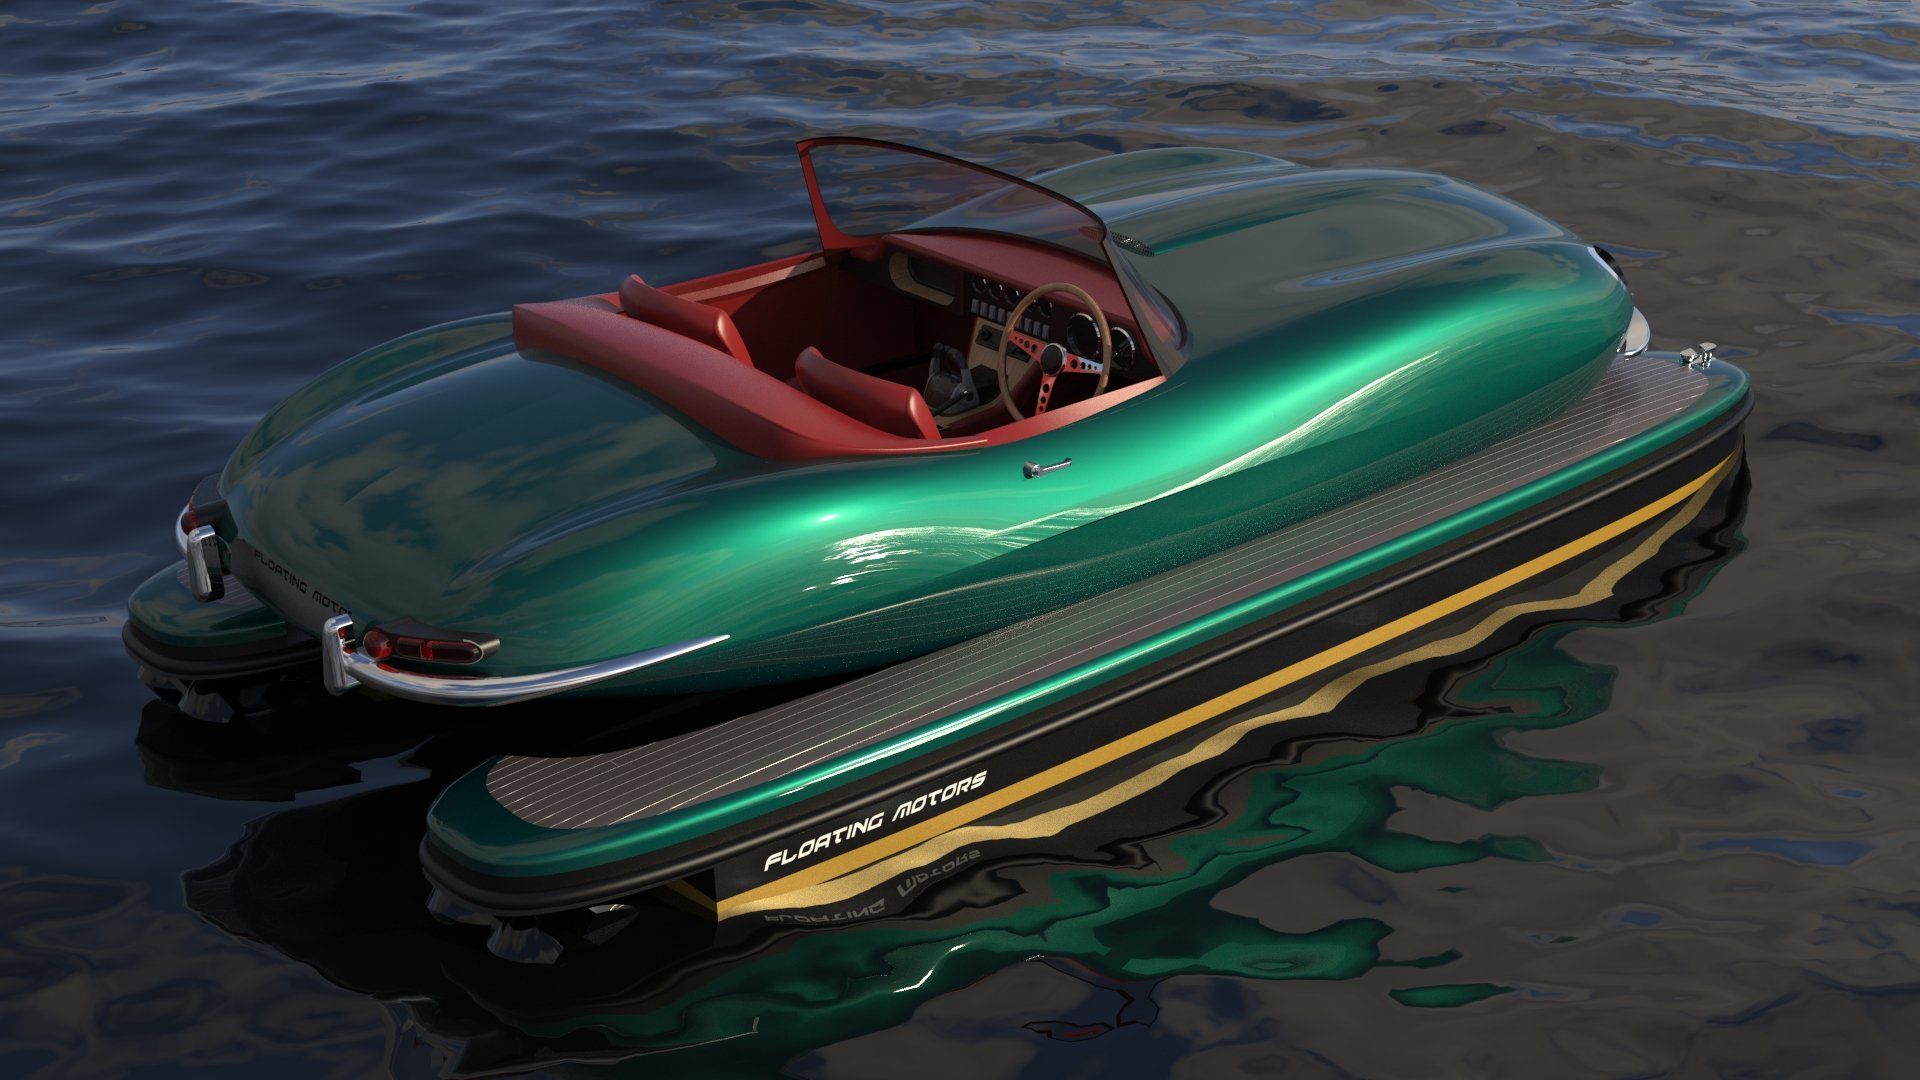 A picture of a resto-modded boat car designed by Floating Motors.